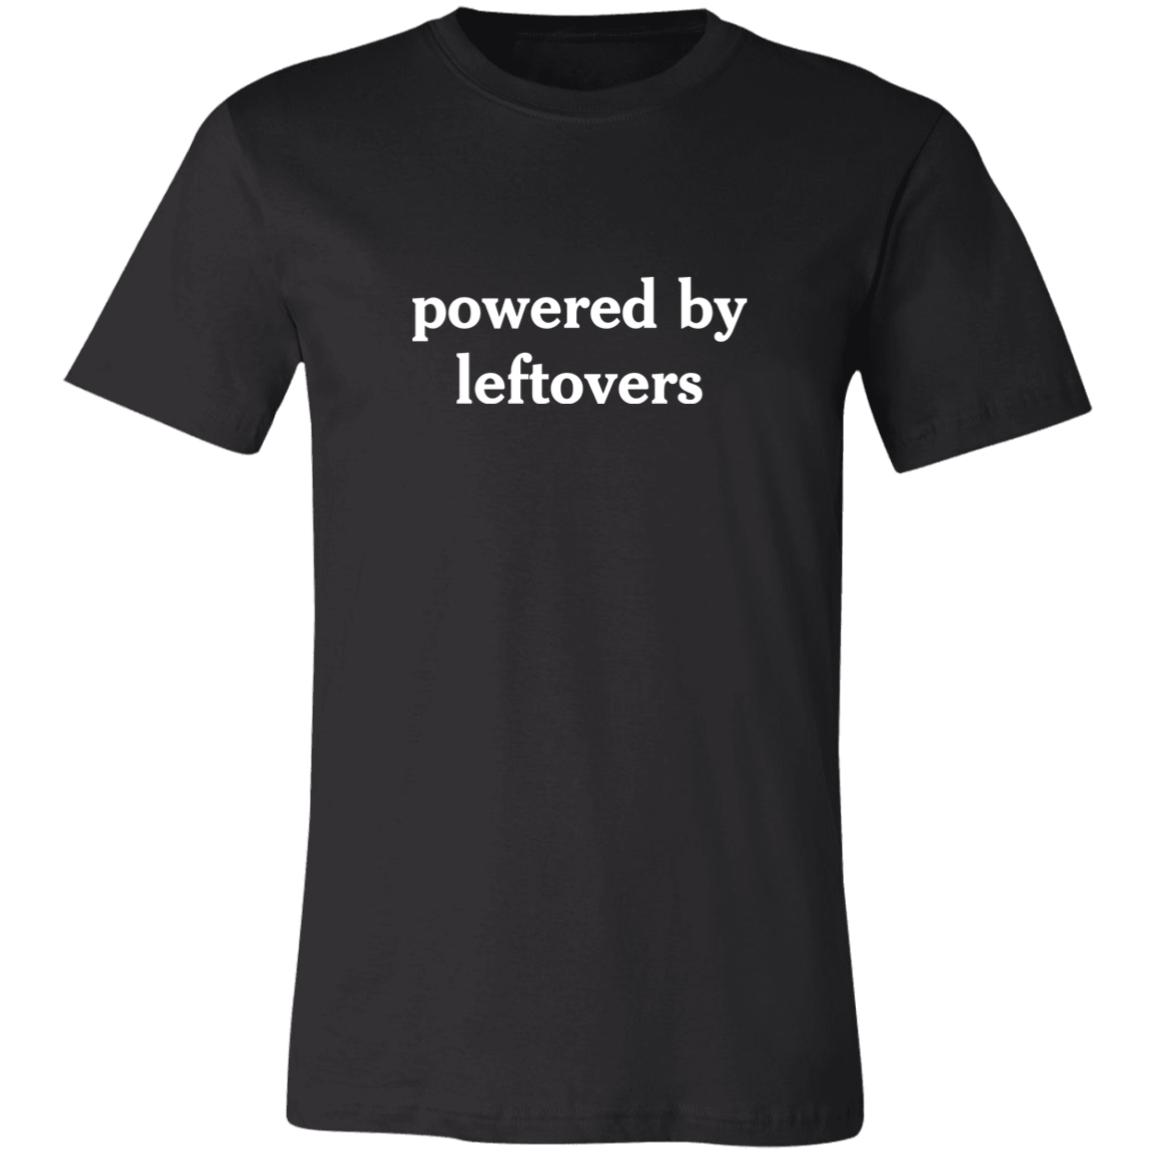 powered by leftovers tee